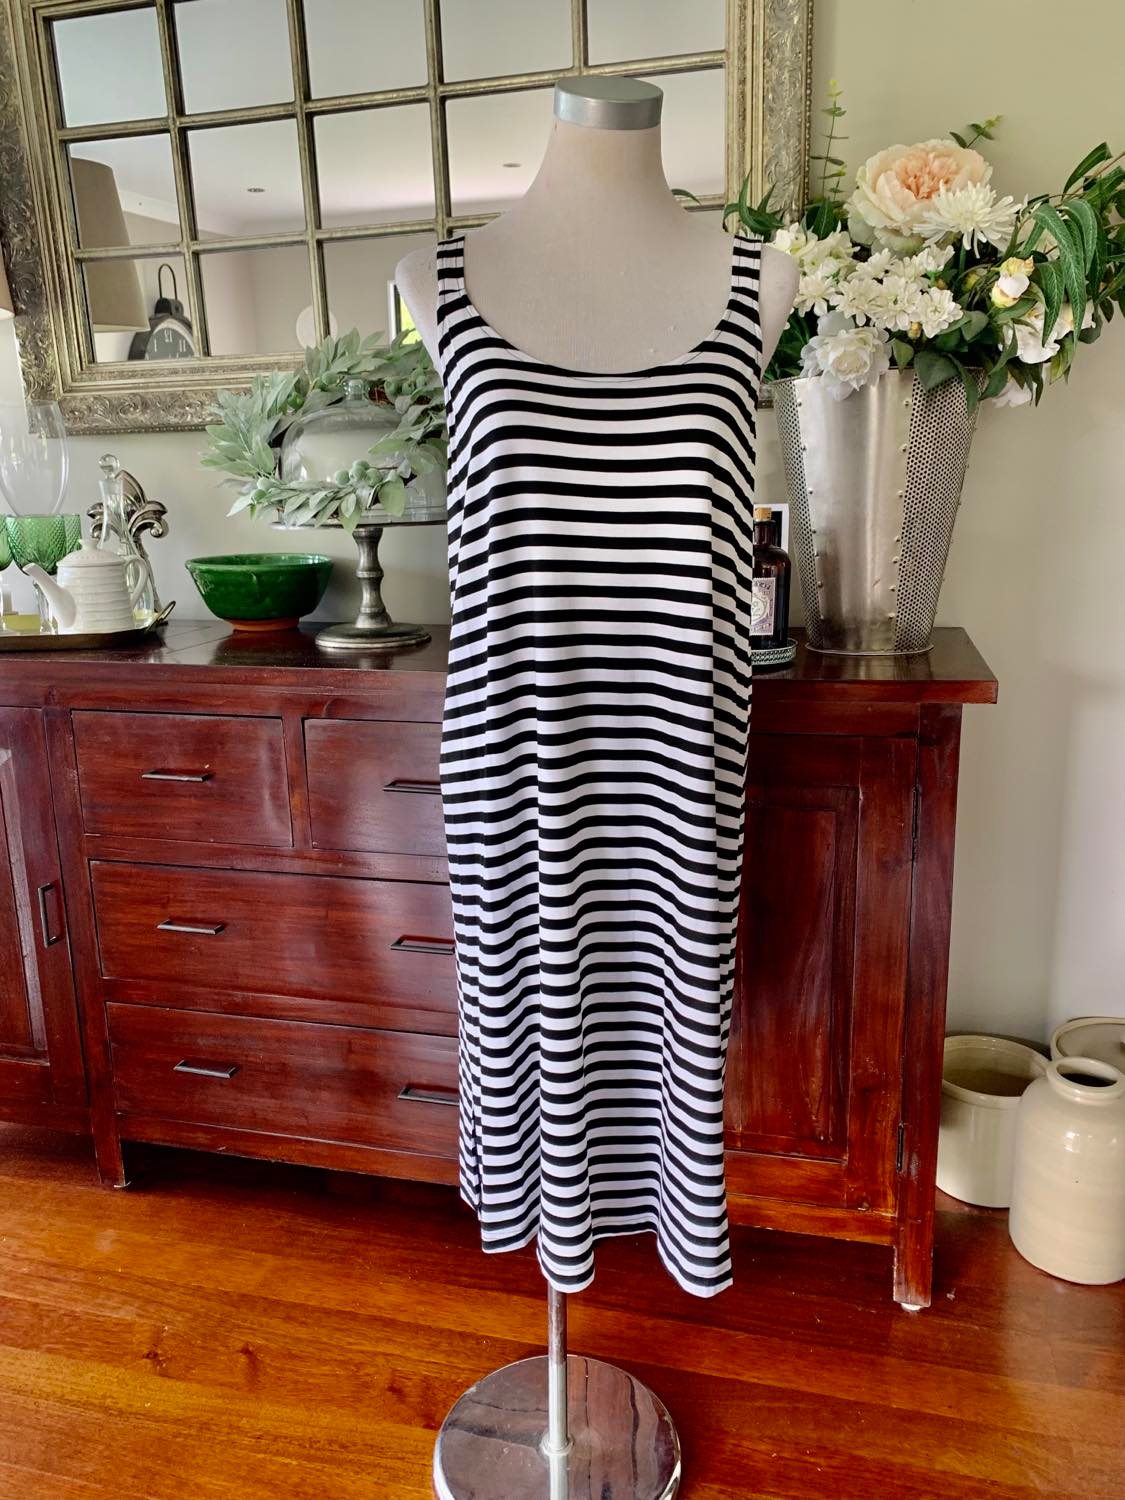 Layering Singlet - Black and Black and White Stripe long length, Essential Basics by Cashews 10-26